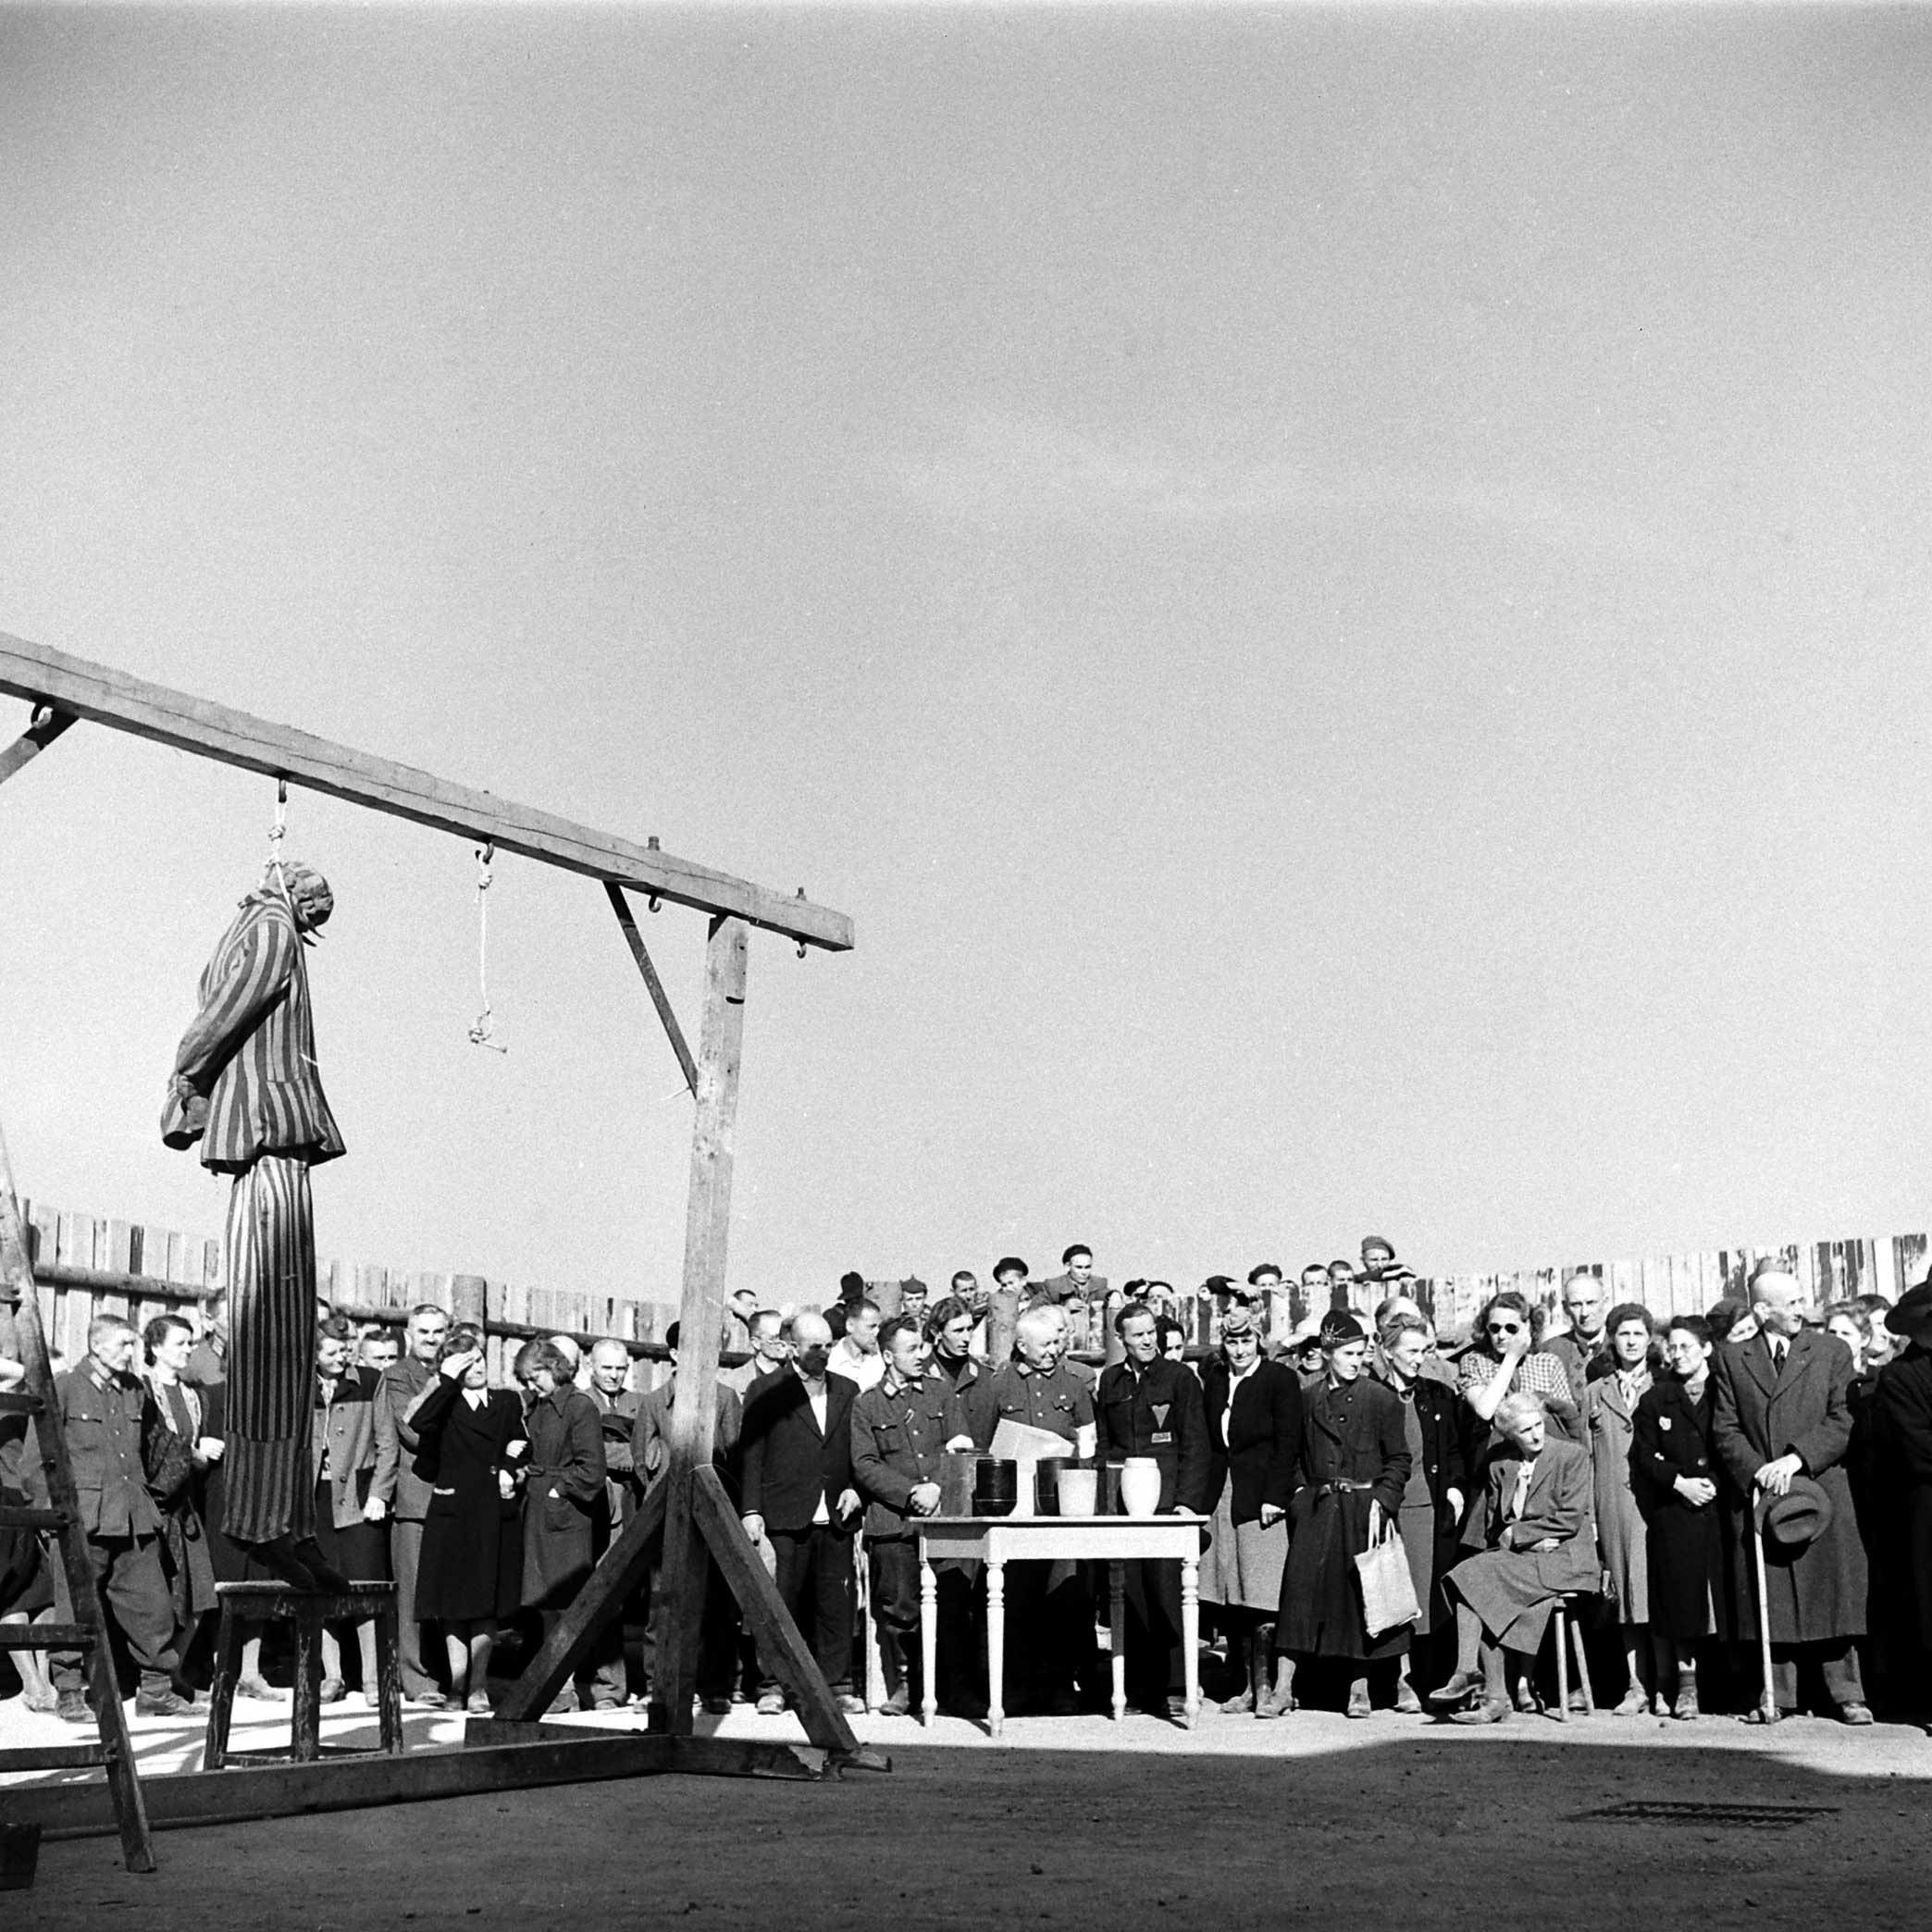 Not published in LIFE. As German officers and Weimar civilians bear witness, after Buchenwald's liberation, to atrocities committed at the camp, a dummy in striped prisoner garb hangs from a gallows Ñ a gruesome demonstration of one of the many public ways that inmates were murdered at the camp.